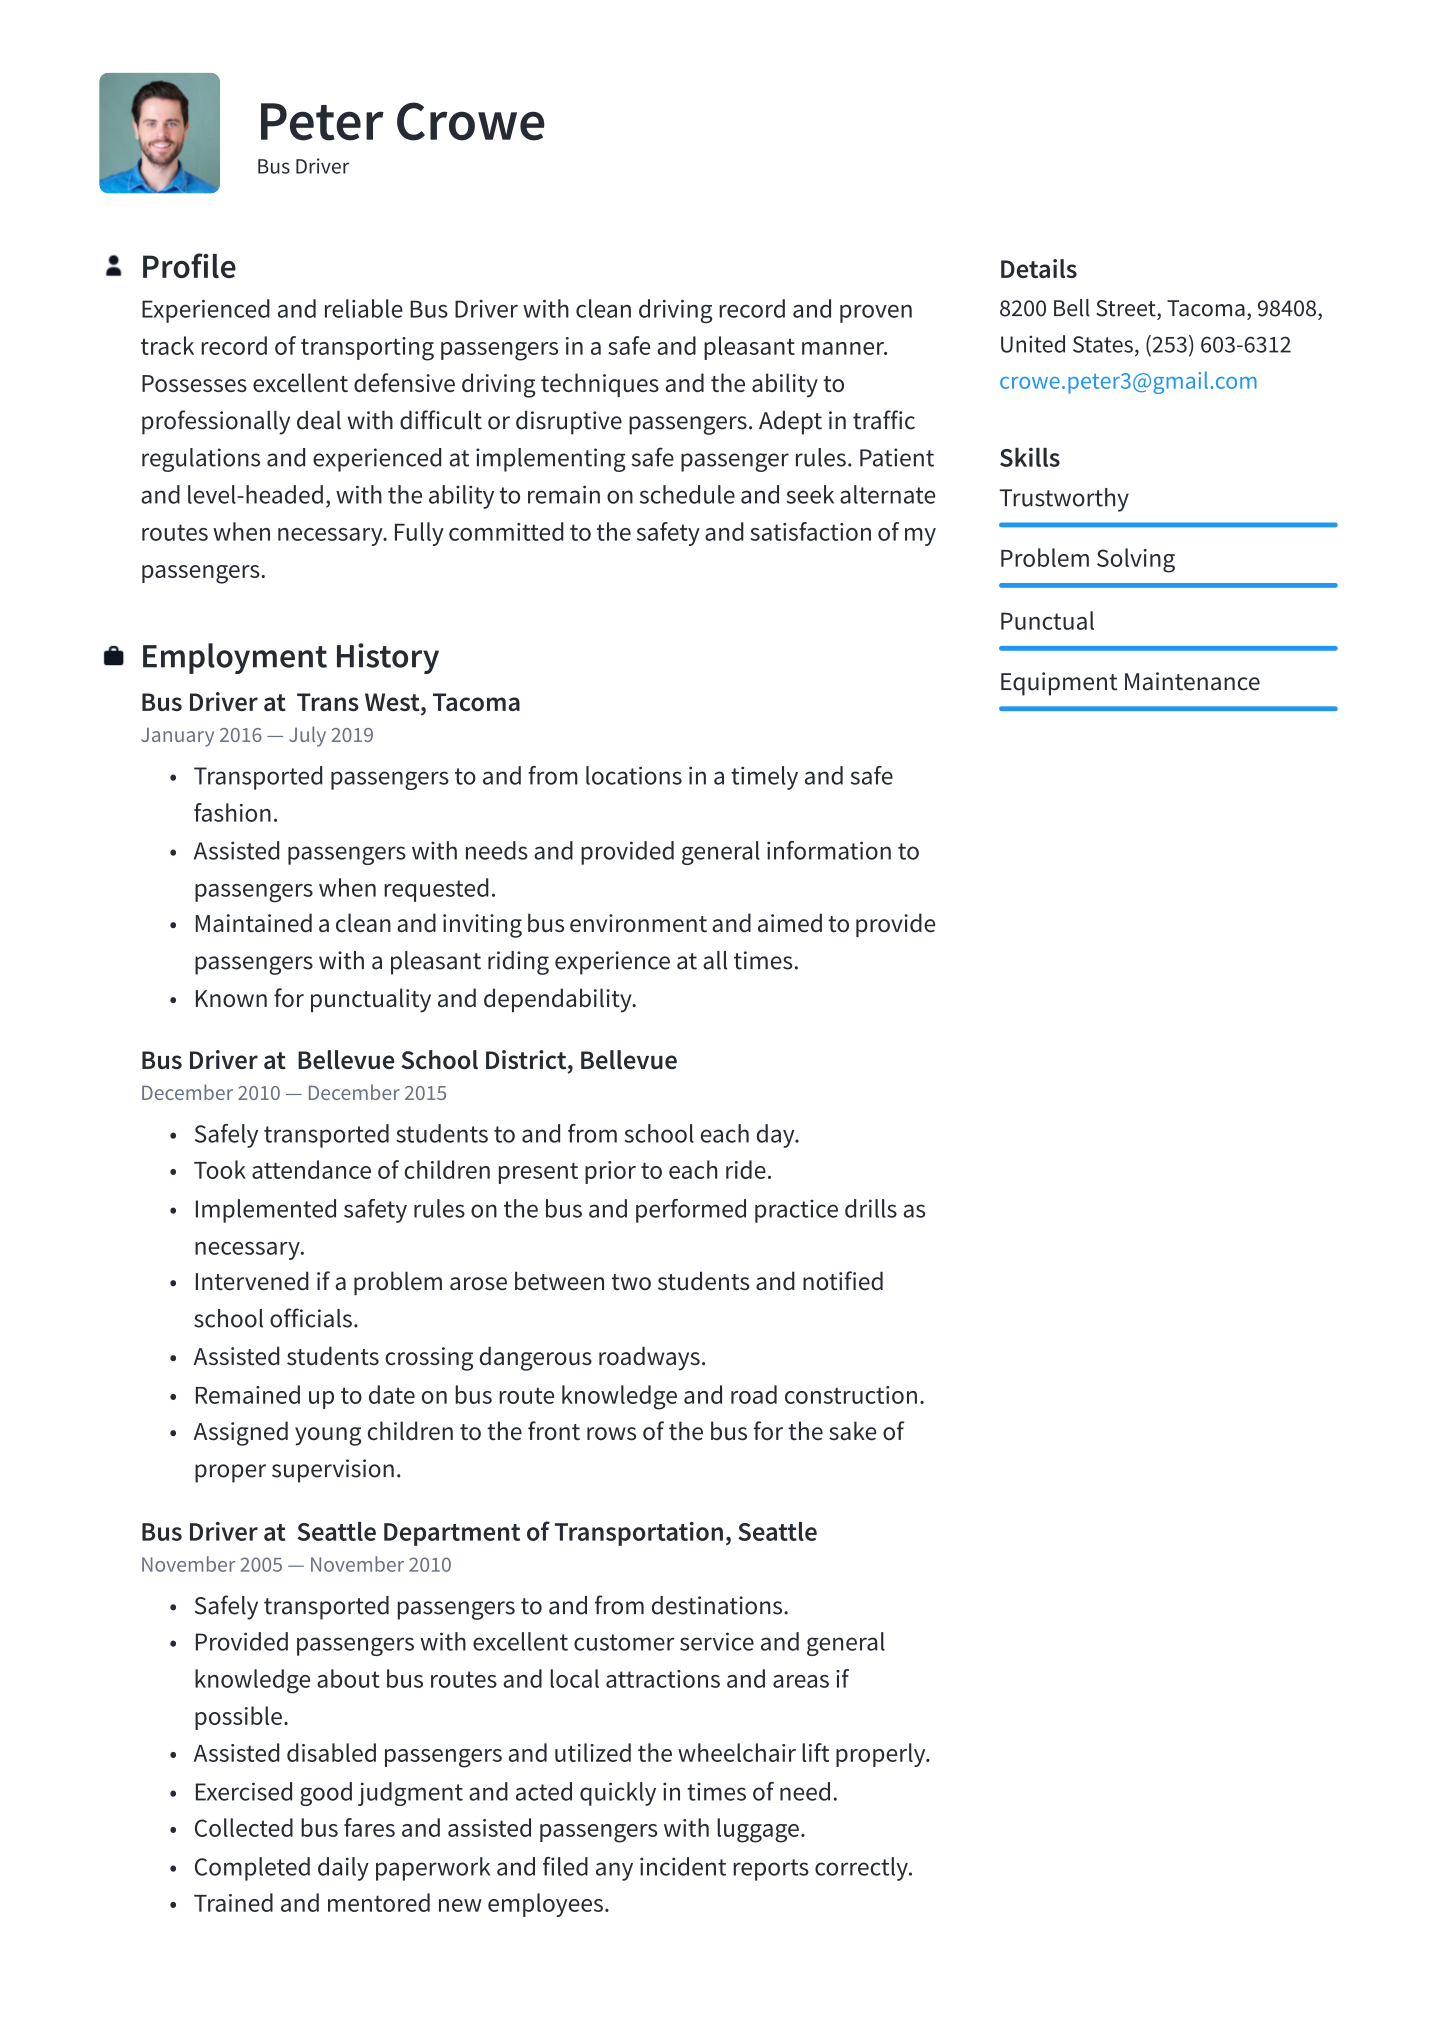 Bus Driver Resume Templates 2020 (Free Download) · Resume.io Inside Safe Driving Certificate Template